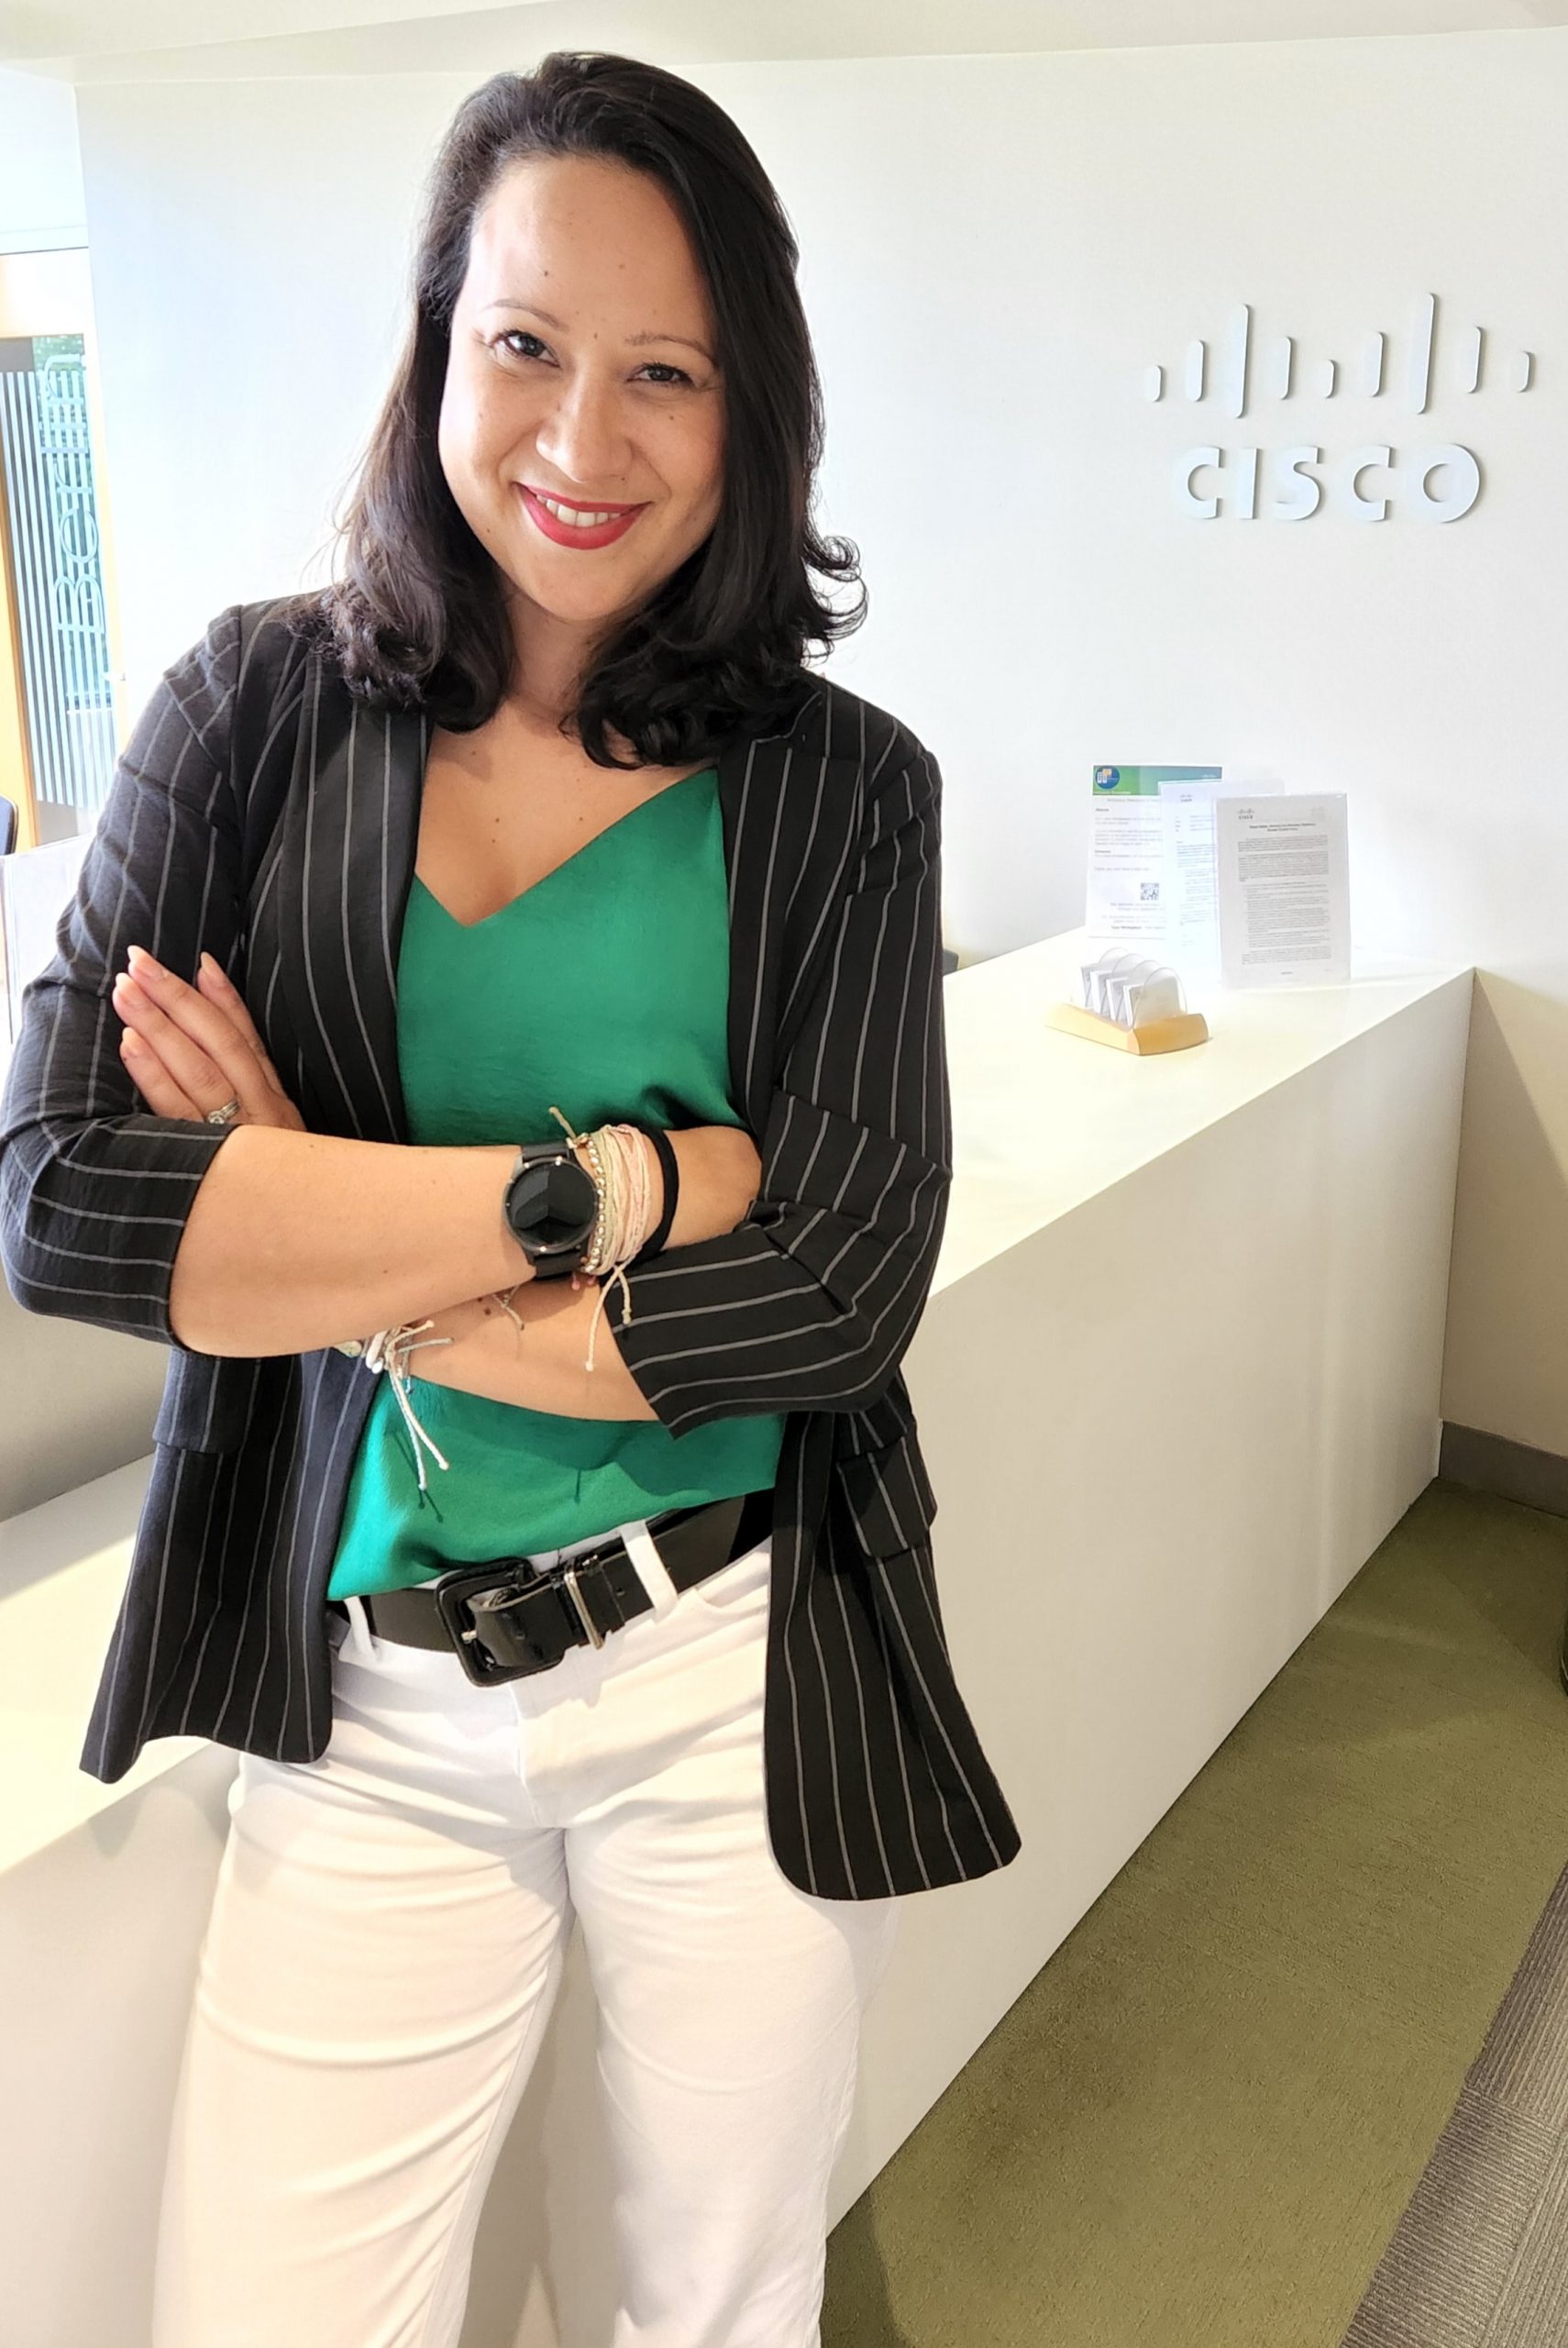 Suzi standing and smiling in foreground with arms crossed wearing black blazer and green blouse in Cisco office with Cisco logo behind her.